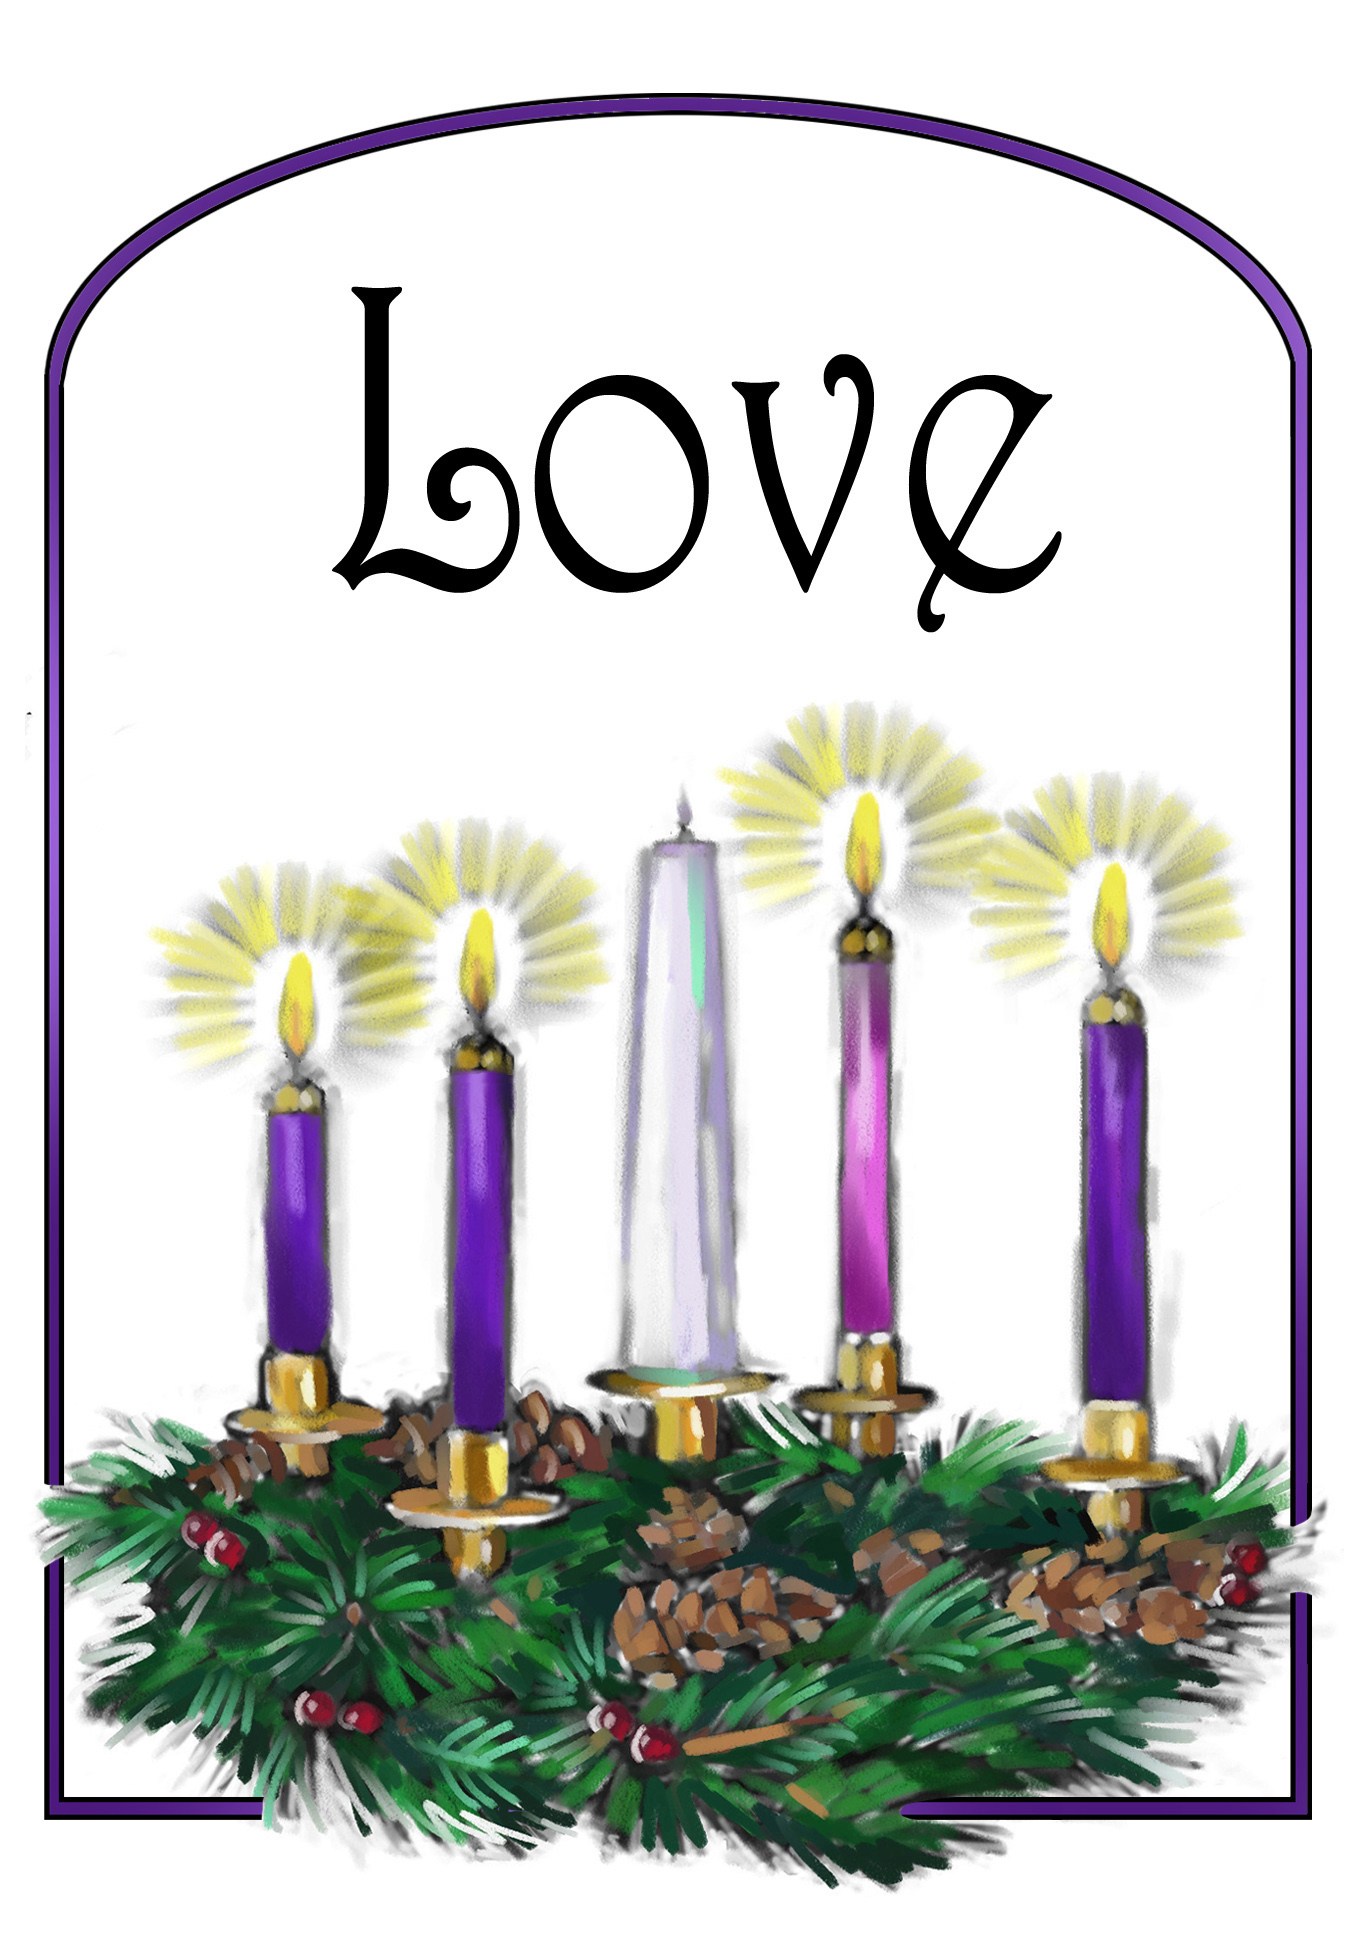  th sunday of. Advent clipart advent love